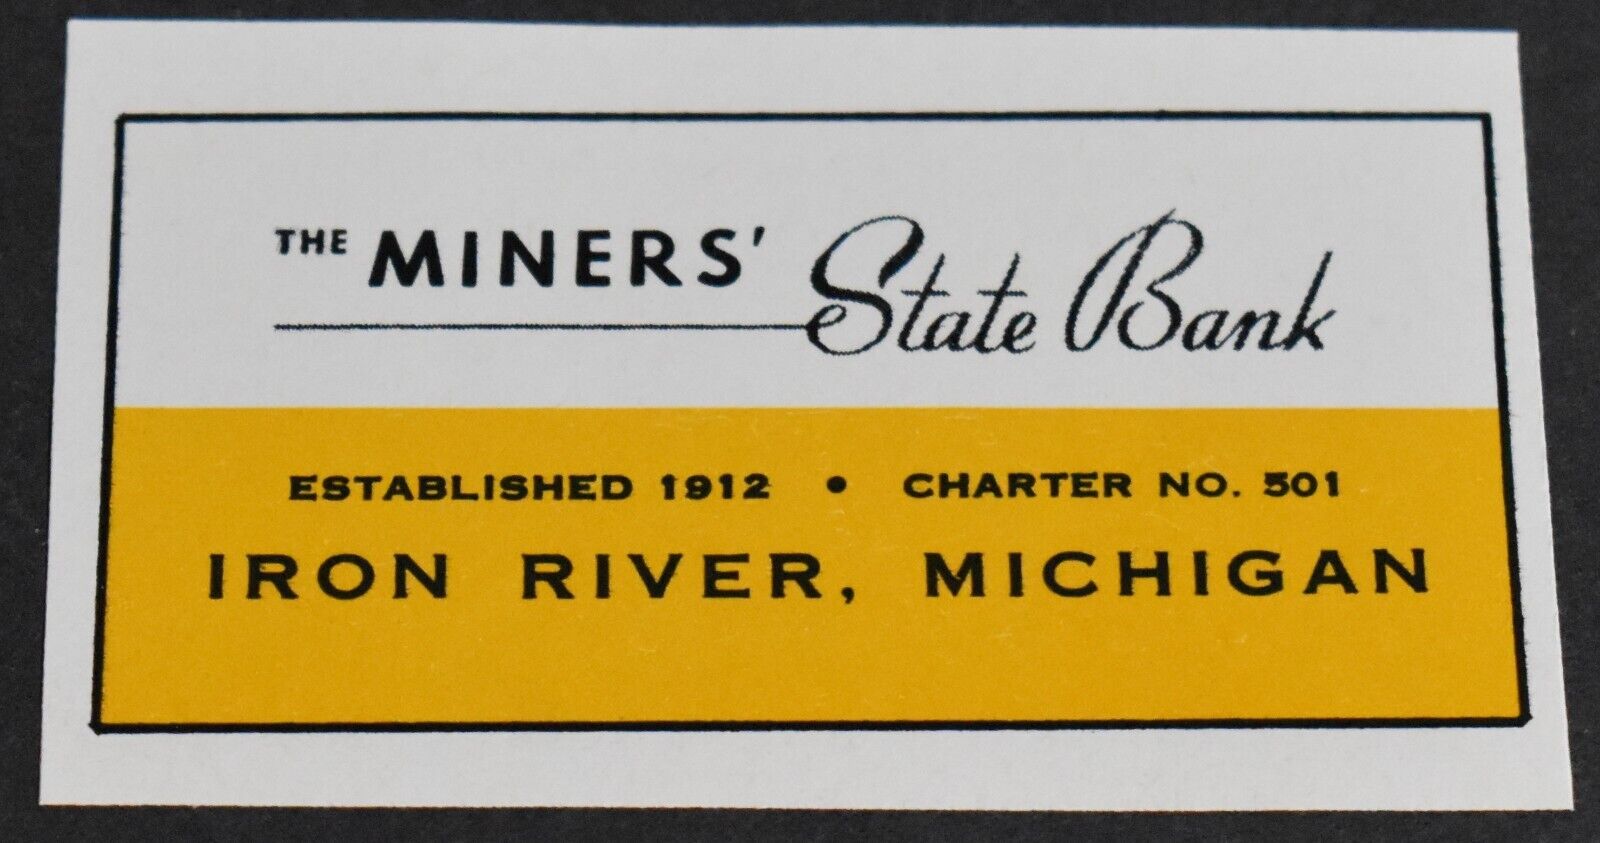 1969 Print Ad Michigan Iron River The Miners\' State Bank Established 1912 art